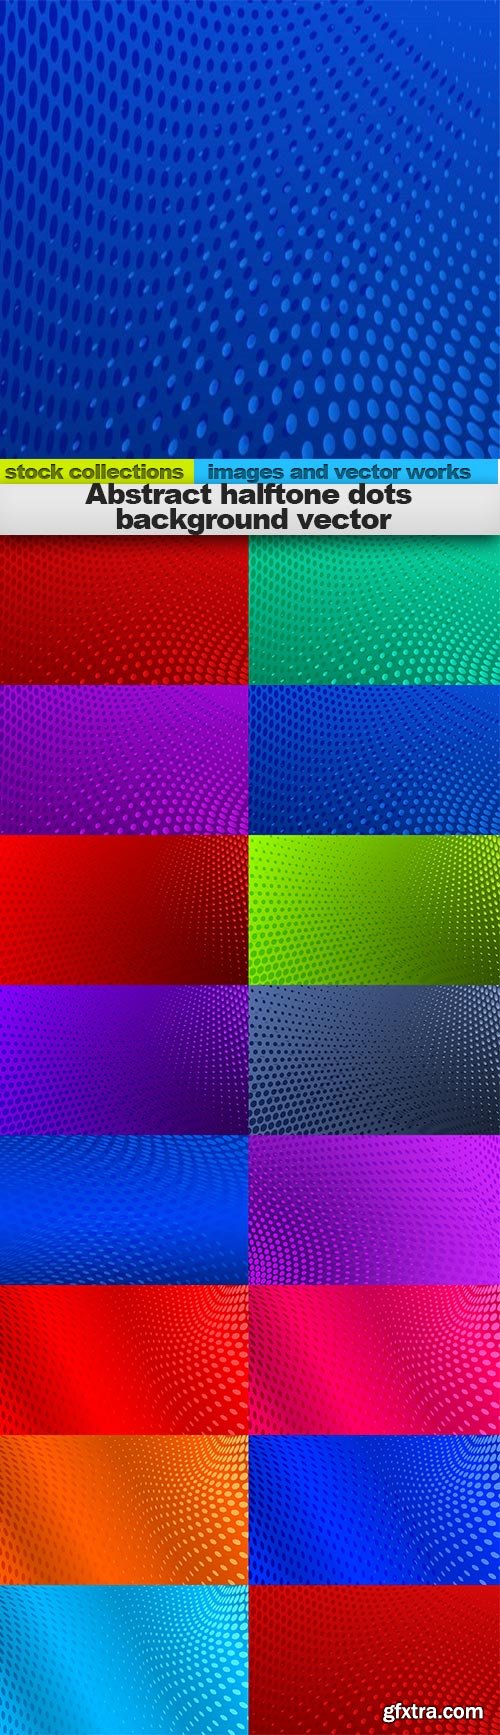 Abstract halftone dots background vector, 15 x EPS